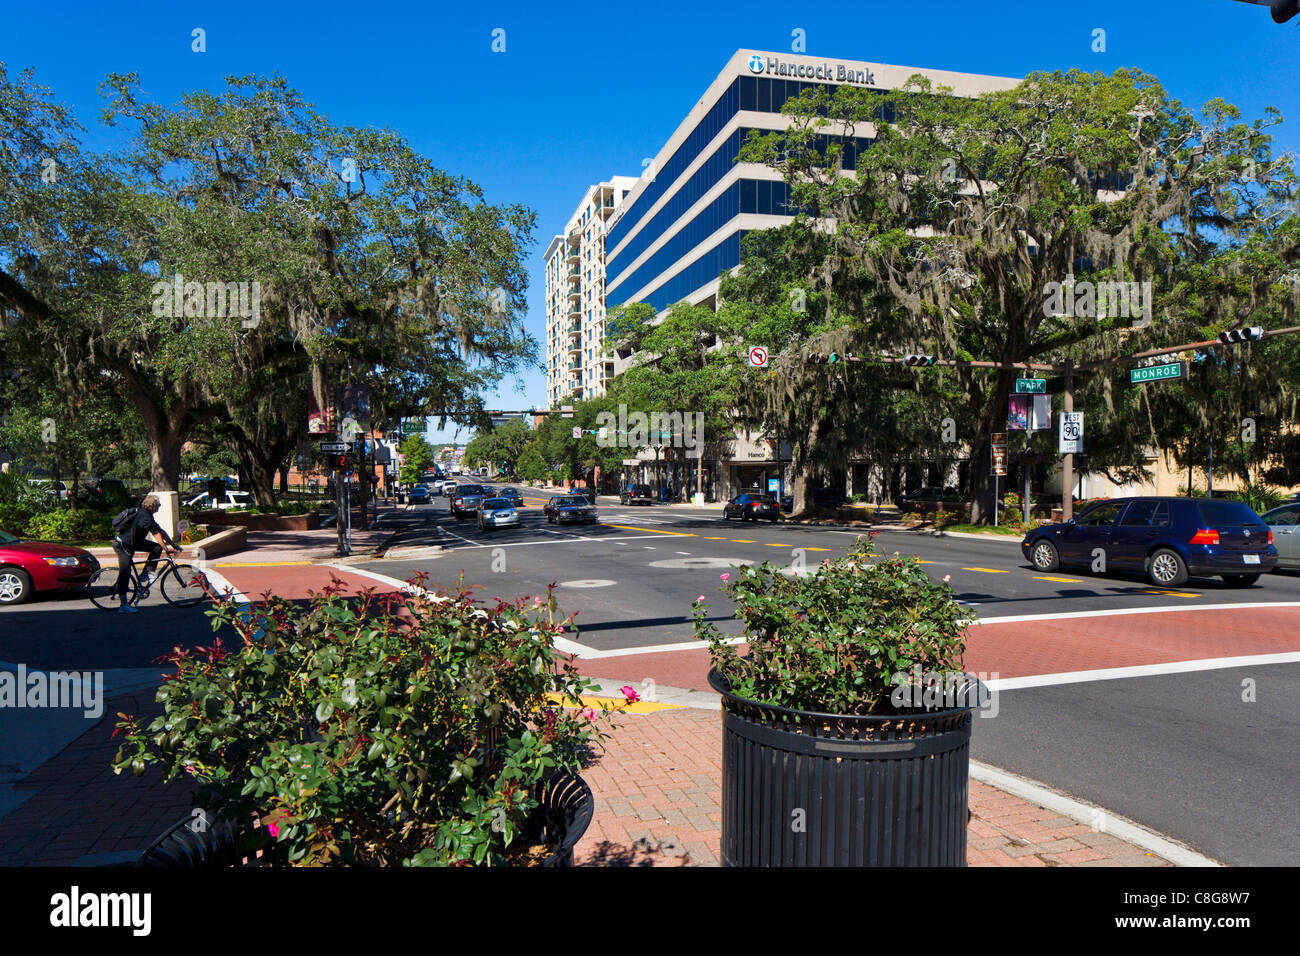 Monroe Street at the intersection with Park in downtown Tallahassee, Florida, USA Stock Photo